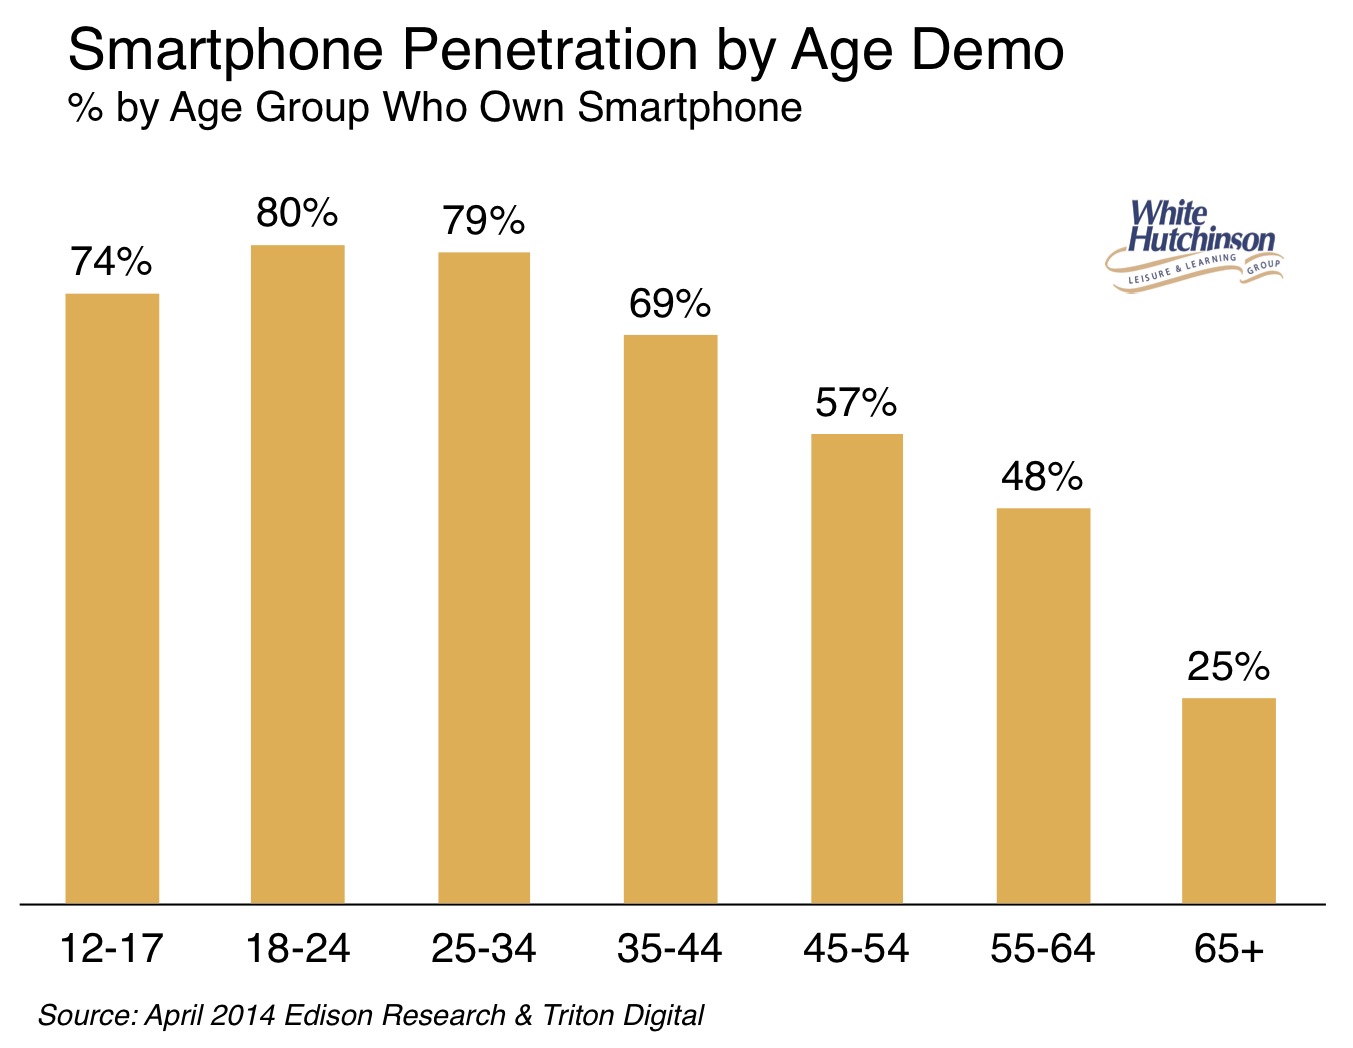 Smartphone penetration by age